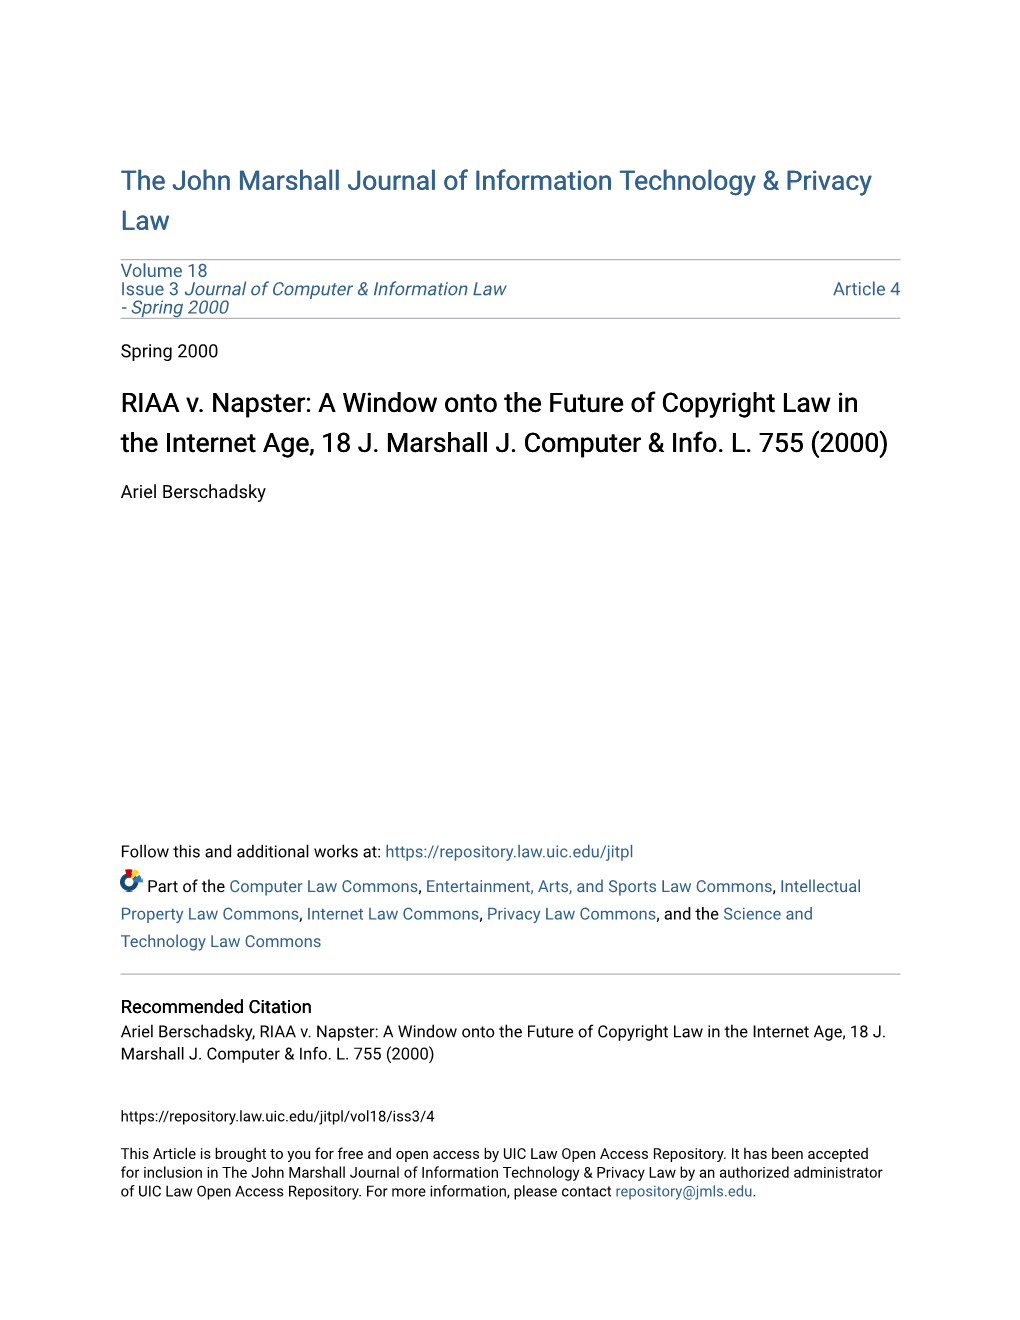 RIAA V. Napster: a Window Onto the Future of Copyright Law in the Internet Age, 18 J